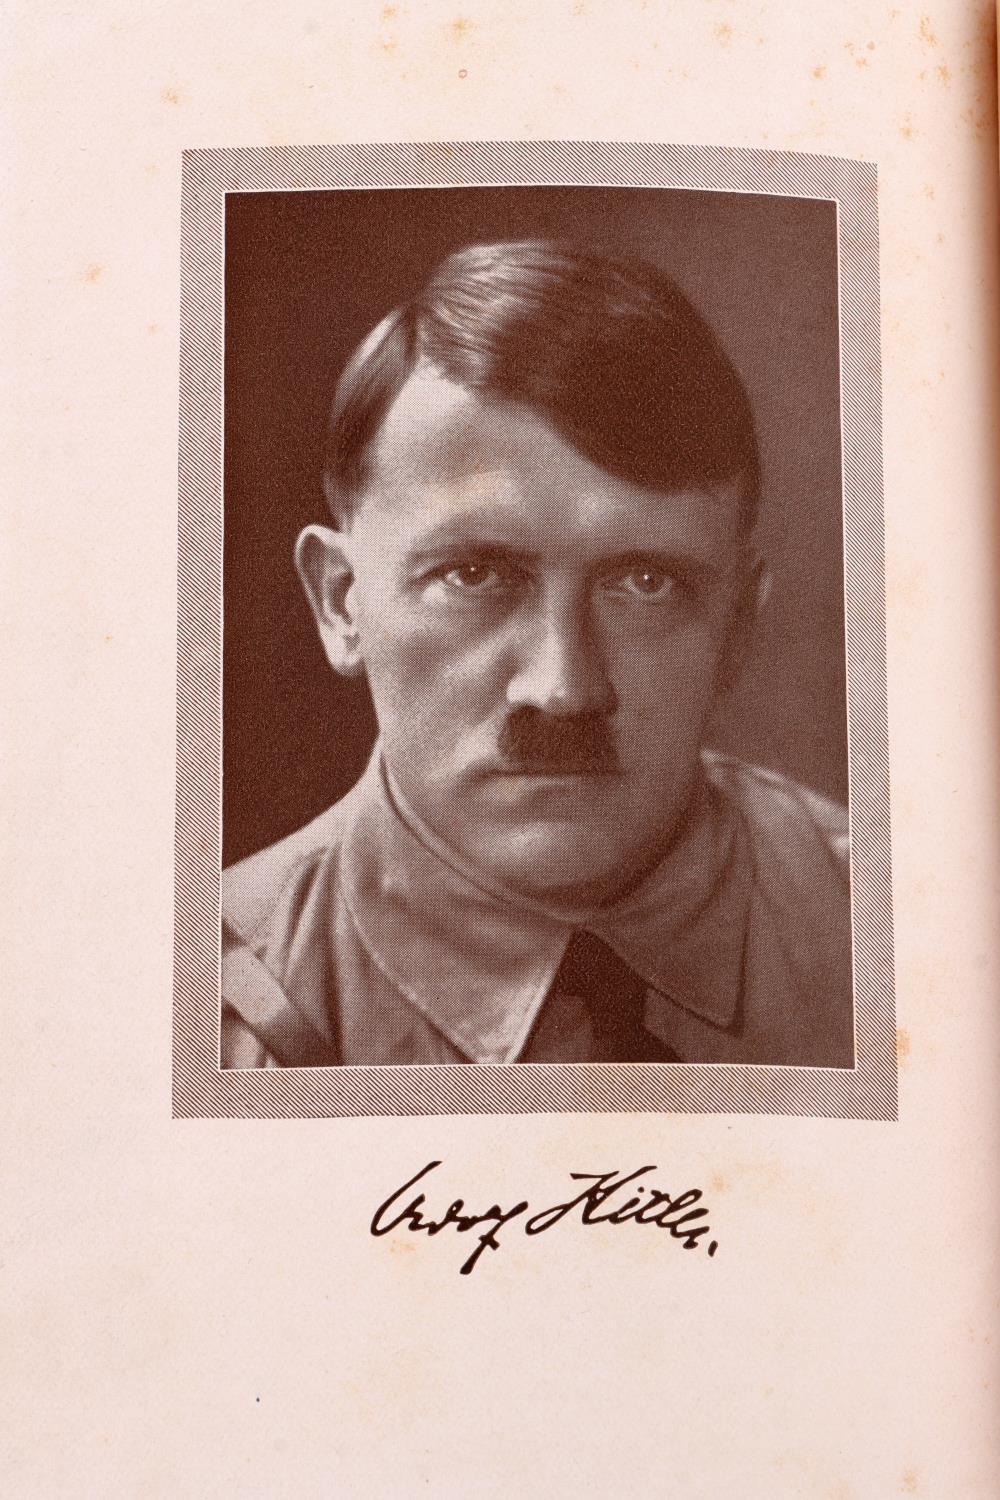 WWII ADOLF HITLER PERSONALIZED MEIN KAMPF COPY